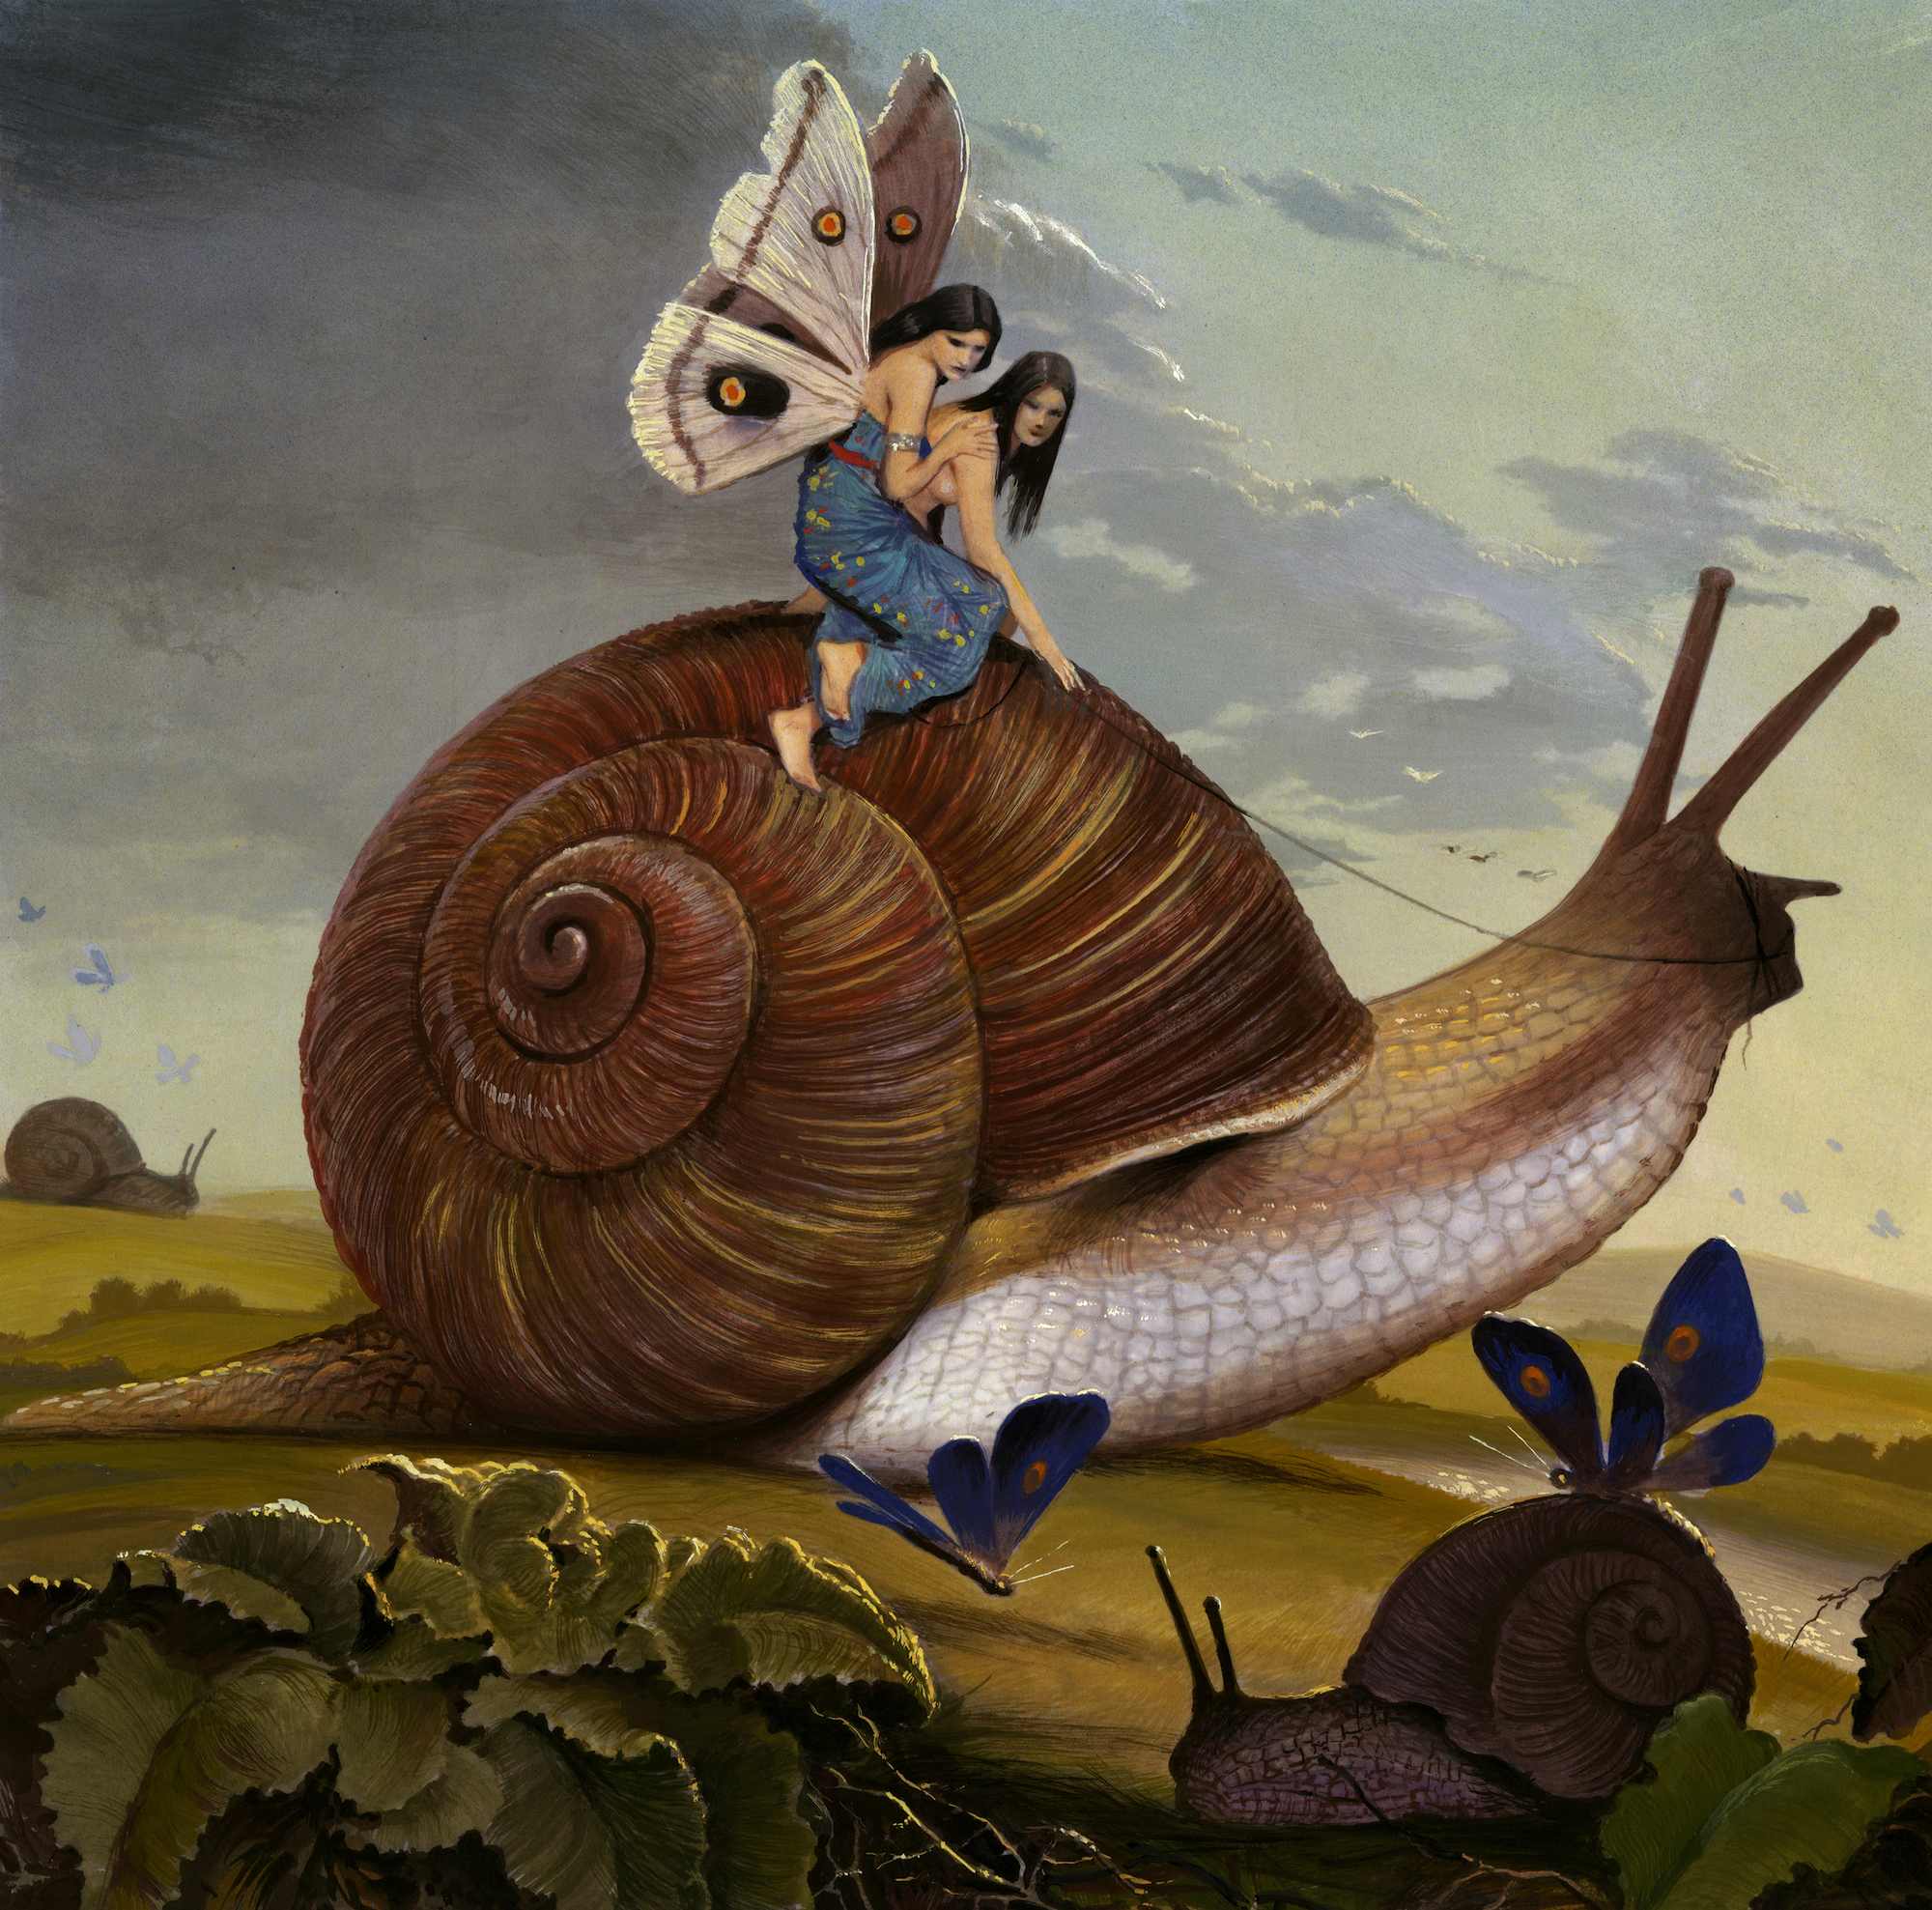 A painting of two fairy-like female figures on top of a giant snail.